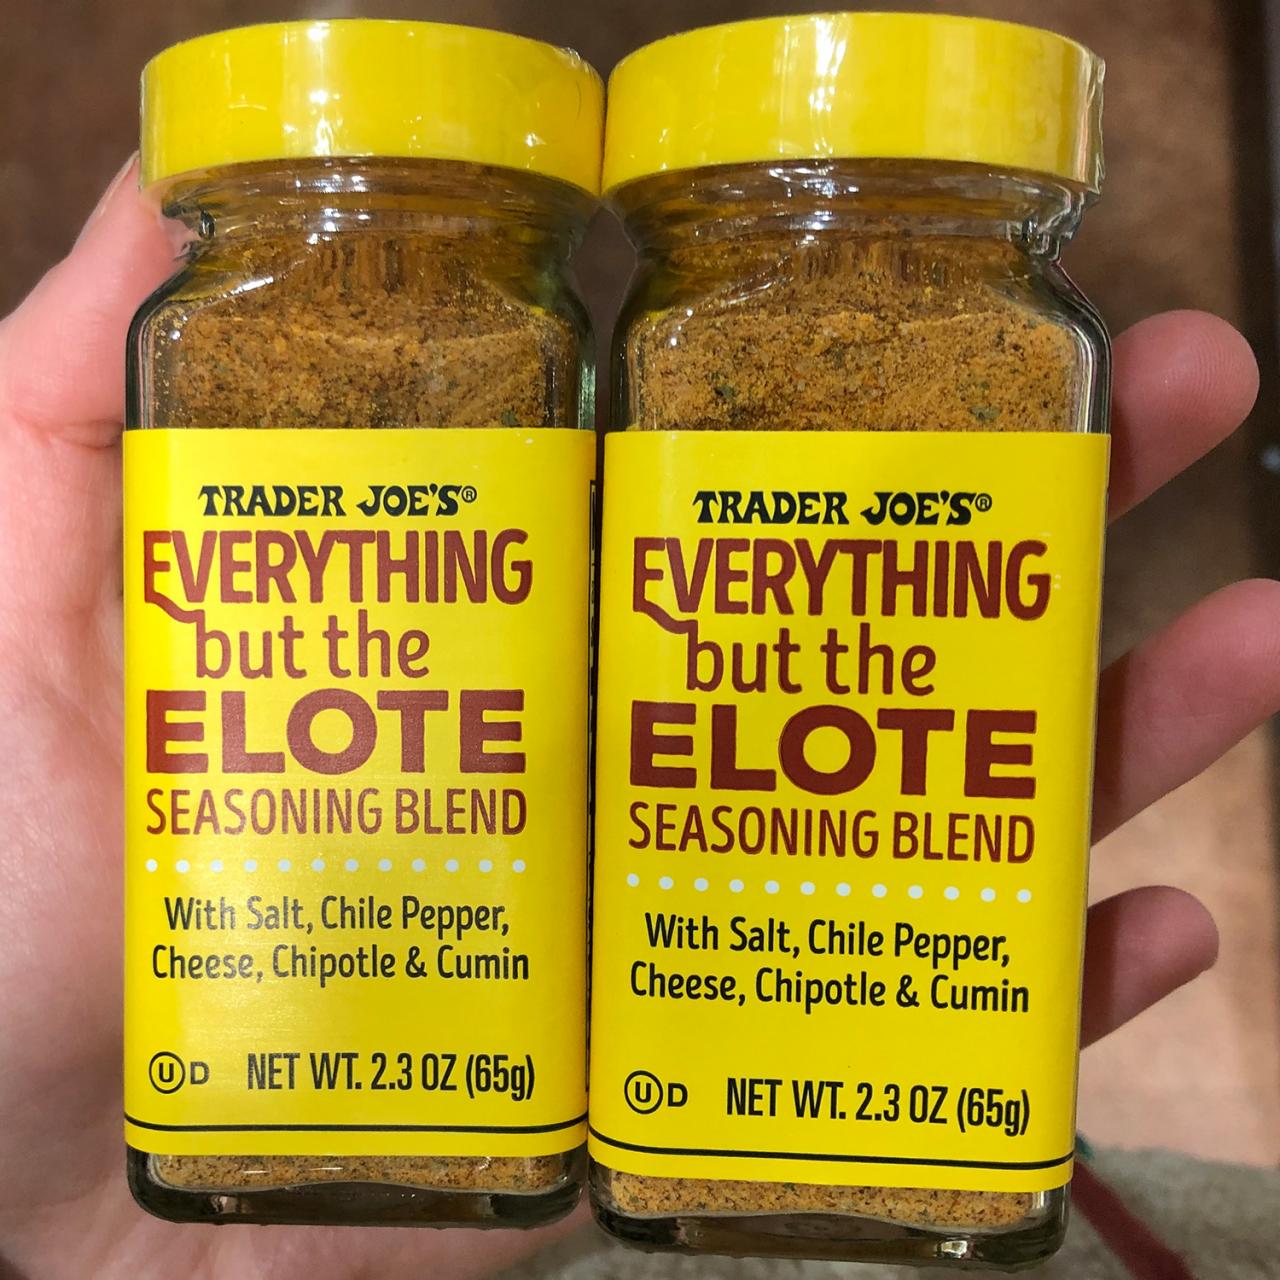 https://food.fnr.sndimg.com/content/dam/images/food/fullset/2020/02/19/FN_trader-joes-everything-but-the-elote_s4x3.jpg.rend.hgtvcom.1280.1280.suffix/1582142877207.jpeg